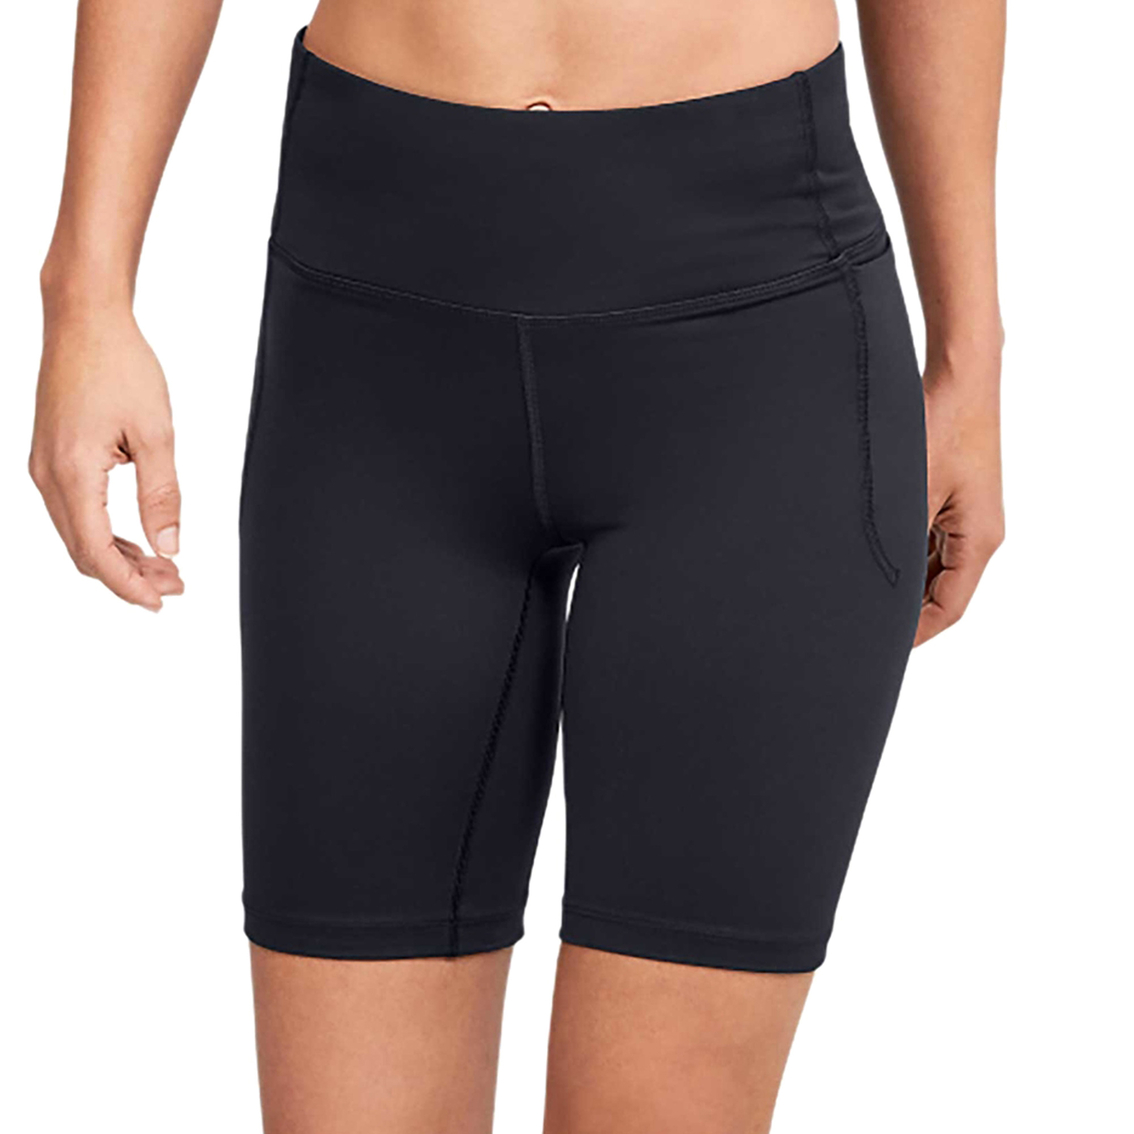 Under Armour Meridian Bike Shorts | Pants | Clothing & Accessories ...